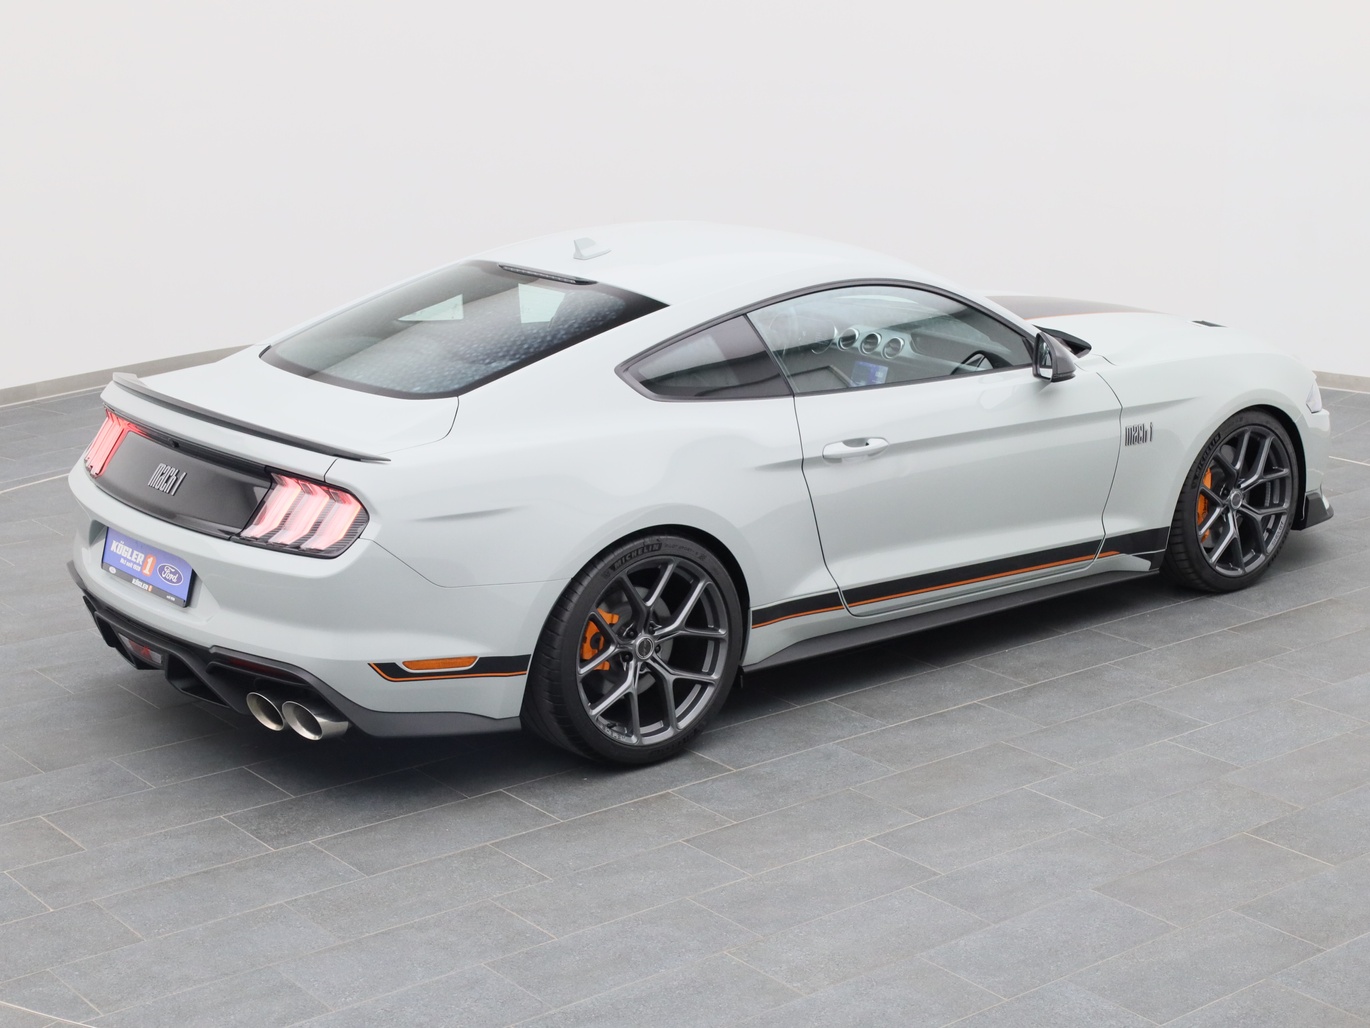  Ford Mustang Customized Mach1 750PS in Fighter Jet Gray 